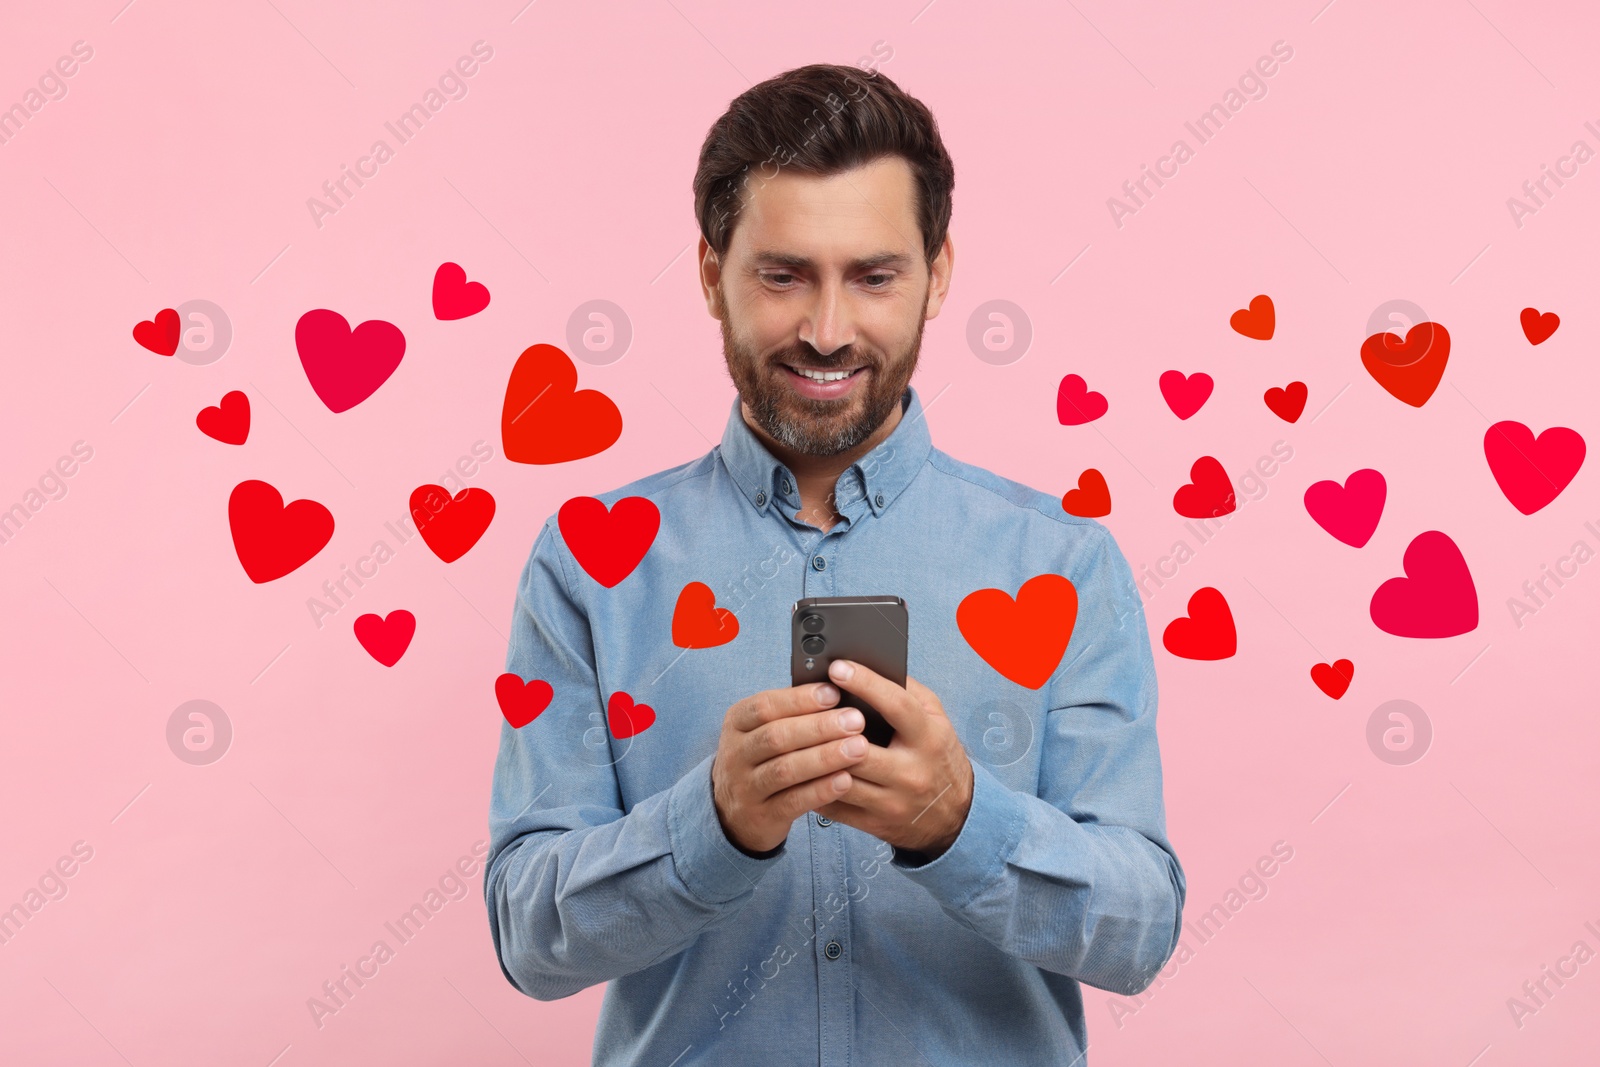 Image of Long distance love. Man chatting with sweetheart via smartphone on pink background. Hearts flying out of device and swirling around him